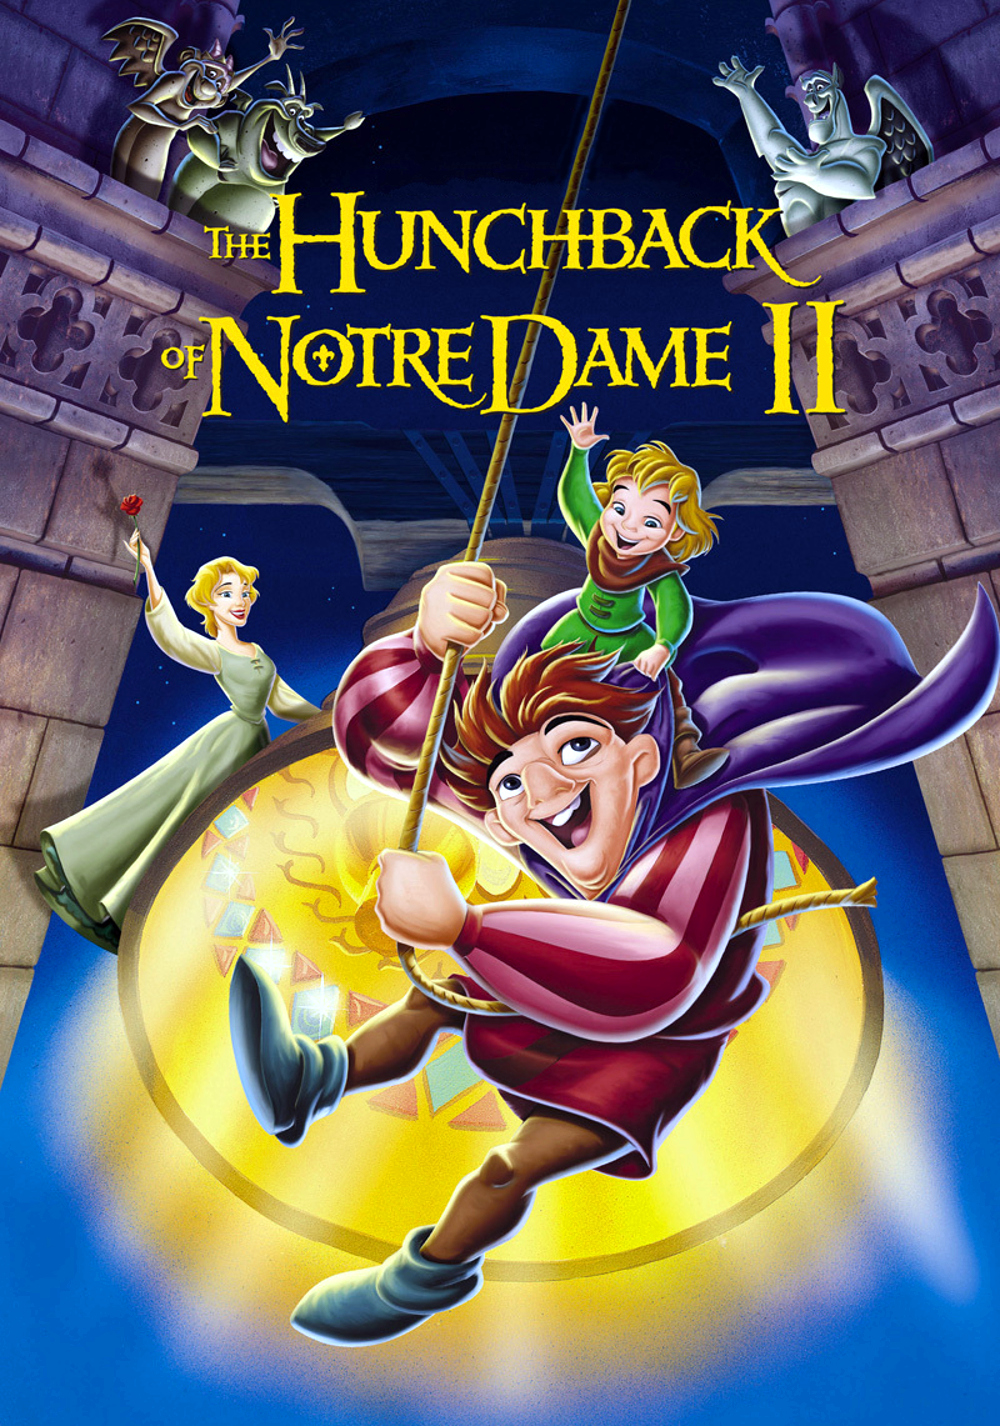 The Hunchback of Notre Dame II Picture - Image Abyss.